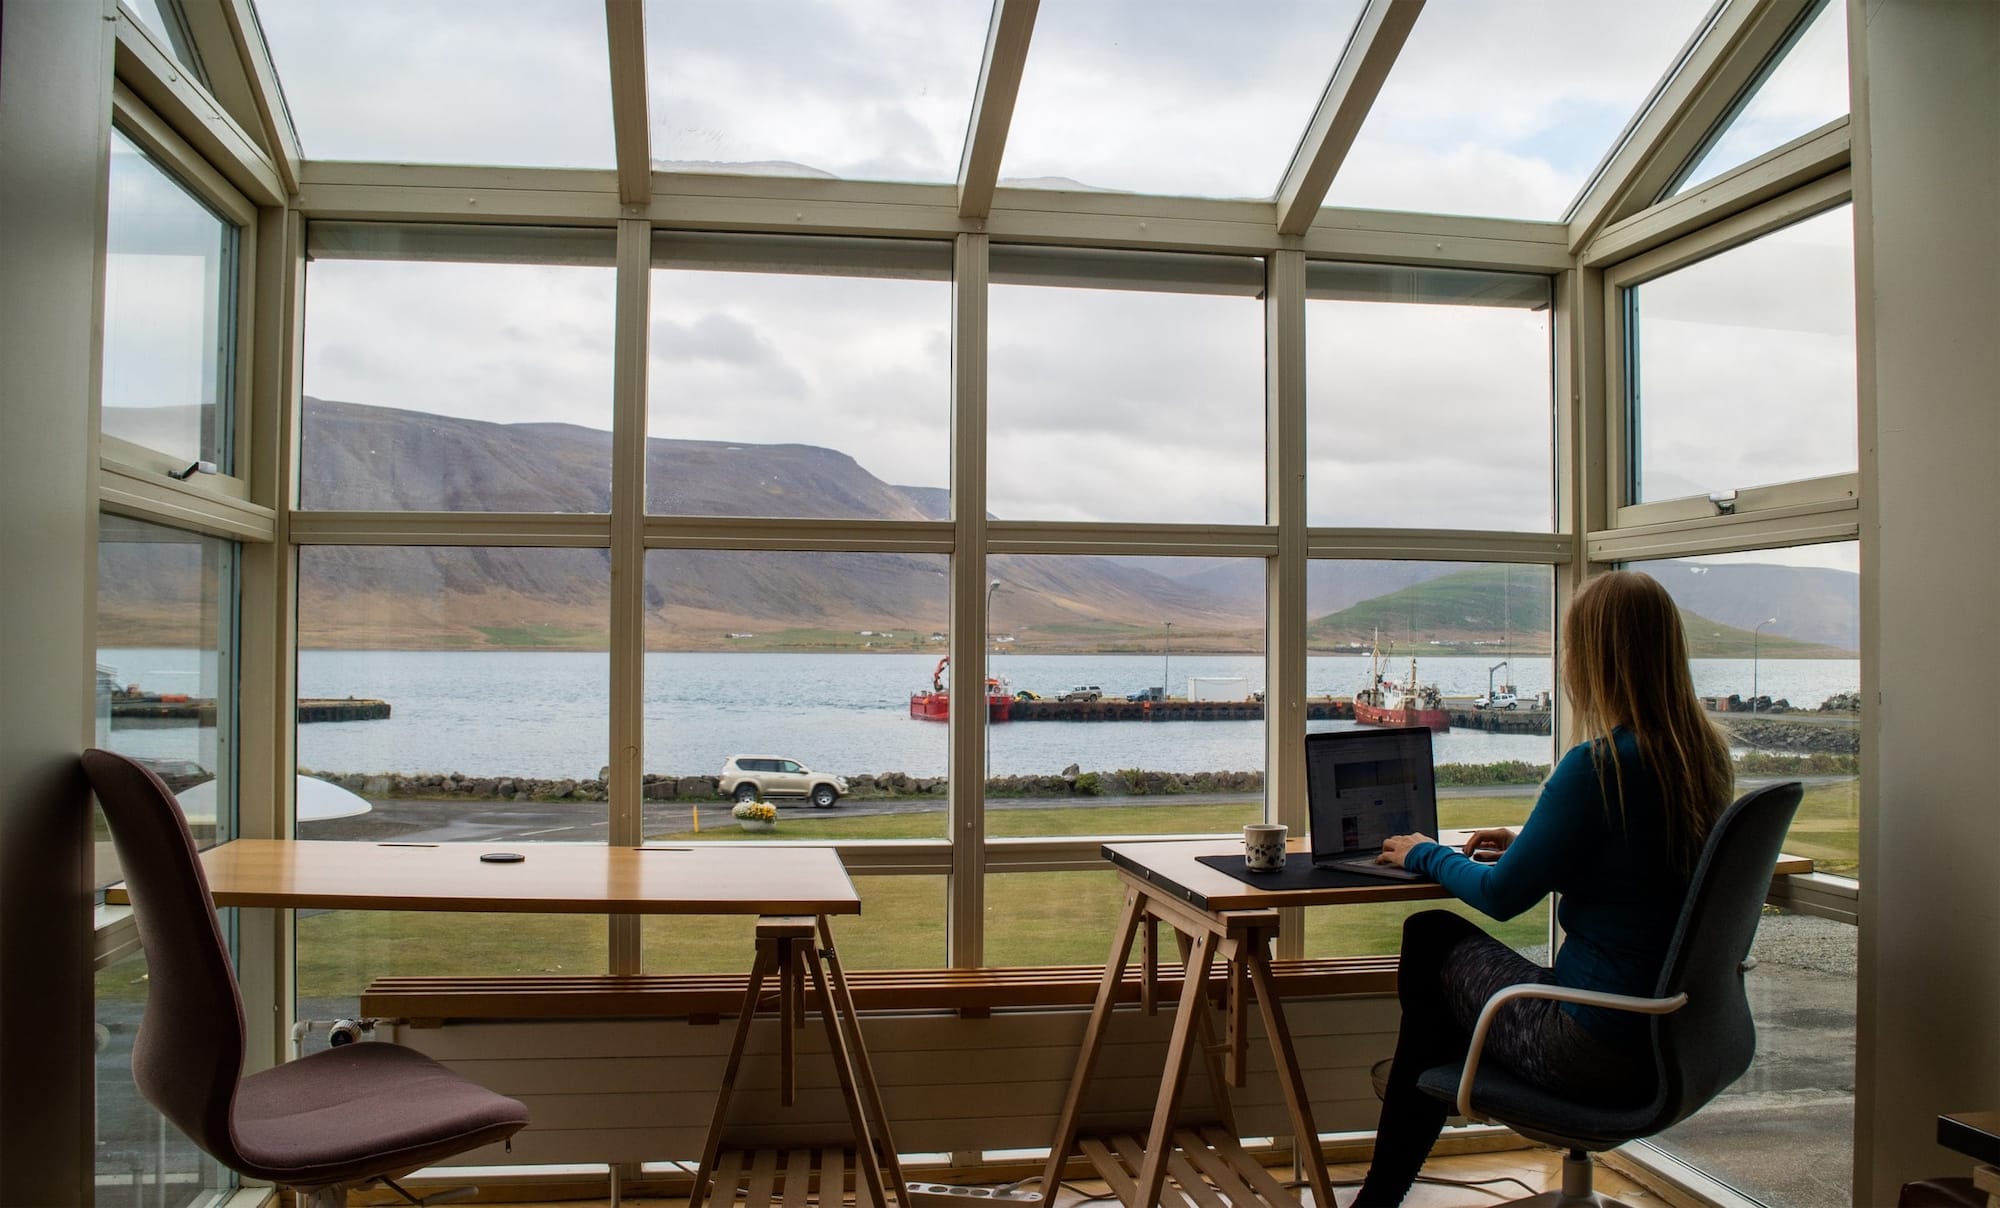 The psychology of remote work and 16 tips to make it work